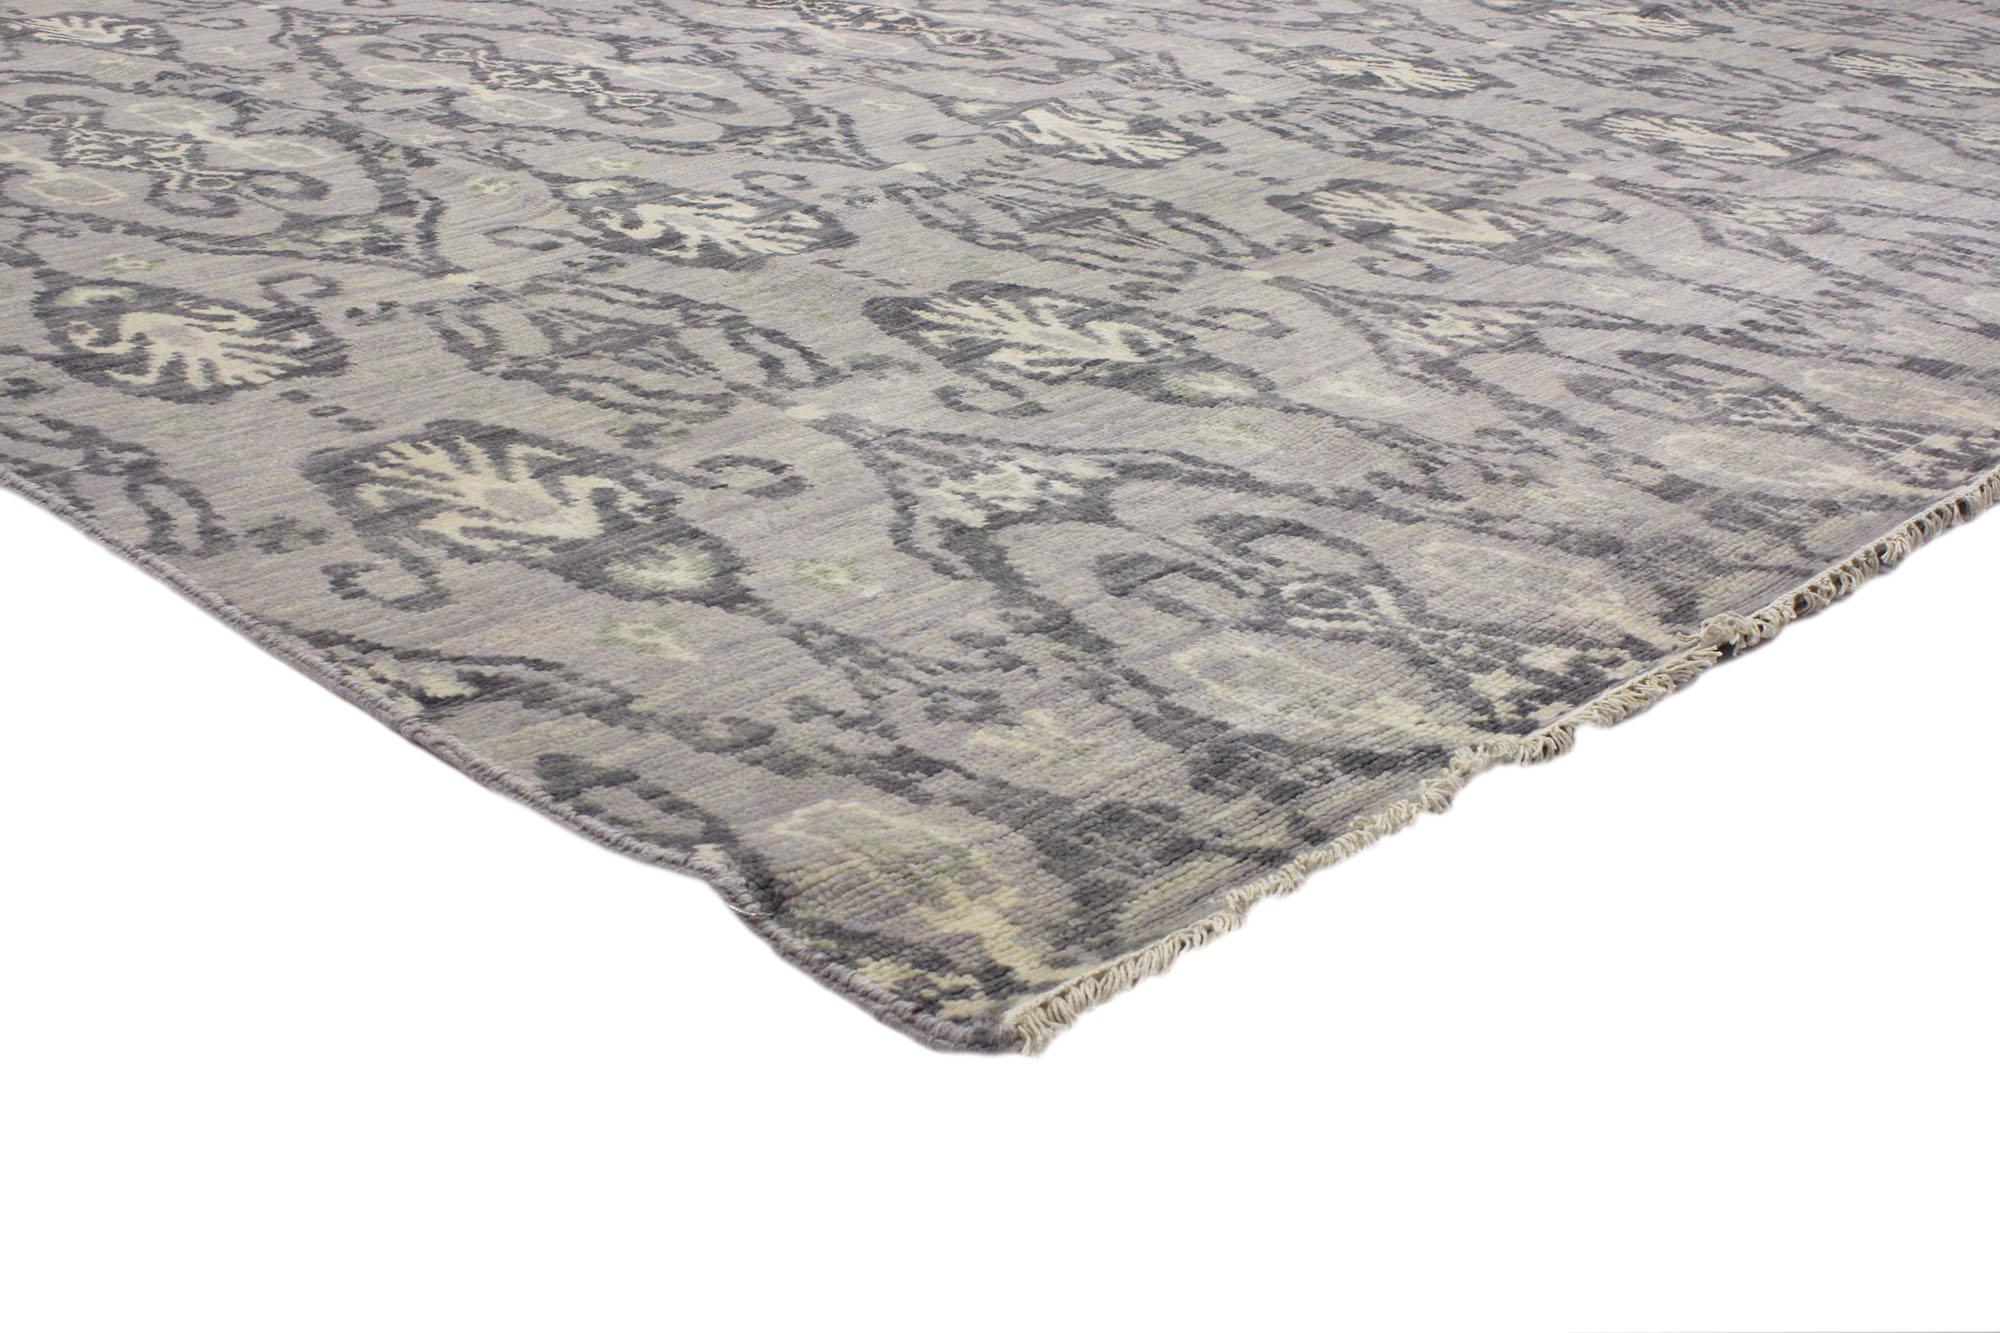 30262 Transitional Gray Ikat Rug, 09'11 x 13'10. Balancing a timeless design with cool gray hues, this hand-knotted wool transitional Damask Ikat rug beautifully embodies a modern style with well-balanced symmetry. The abrashed gray field is covered